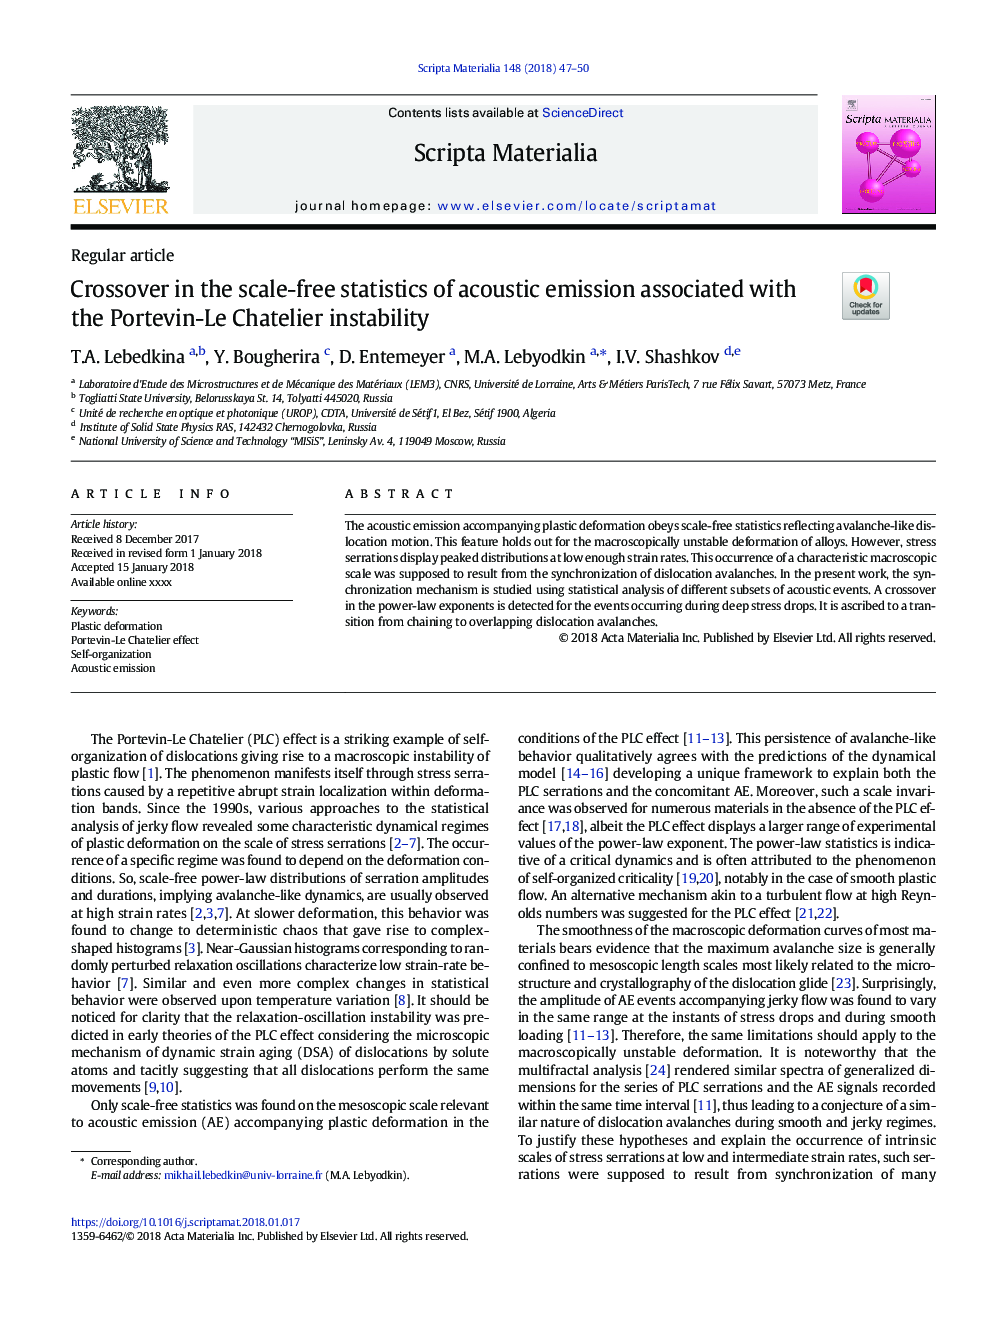 Crossover in the scale-free statistics of acoustic emission associated with the Portevin-Le Chatelier instability